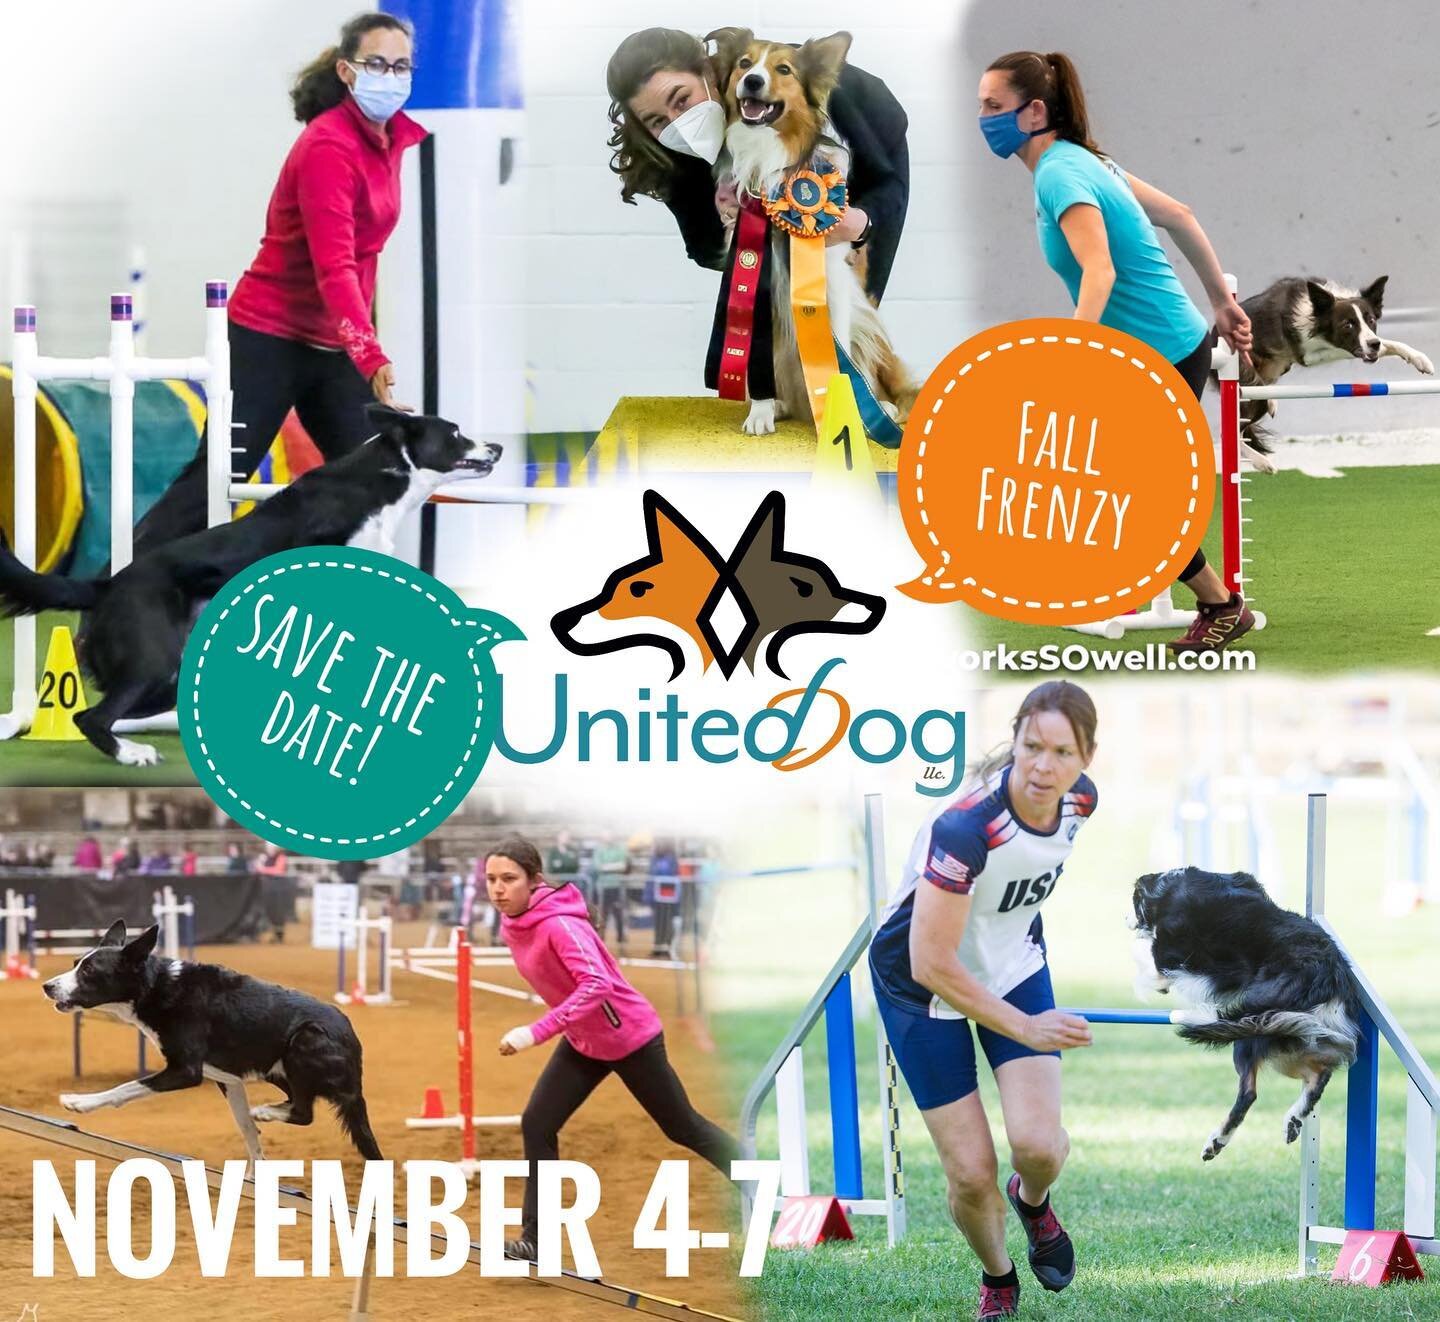 Save the date! November 4-7 2021 we are collaborating with Melanie Miller, Soshana Dos, and Stefanie Rainer to bring you a Fall Frenzy of agility training! Stay tuned for more info to come!